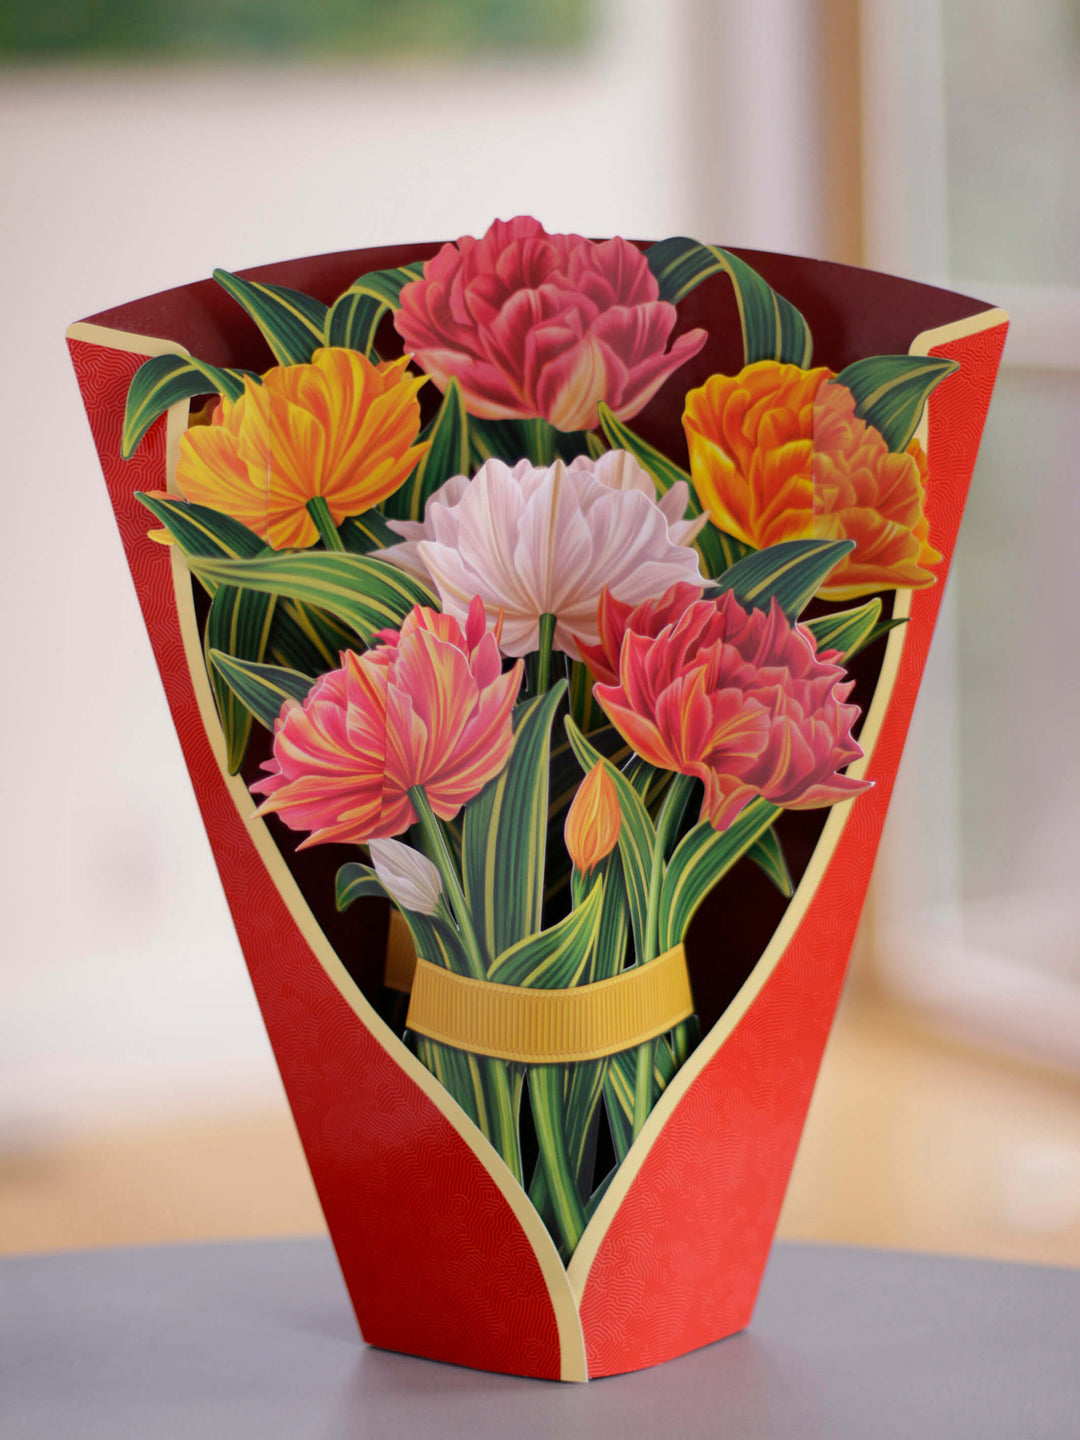 FreshCut Paper 3D pop up "Murillo Tulips" measure 12" tall by 9" wide. Our Murillo Tulips can stand alone or be used with the accompanying vase that comes with your bouquet. 